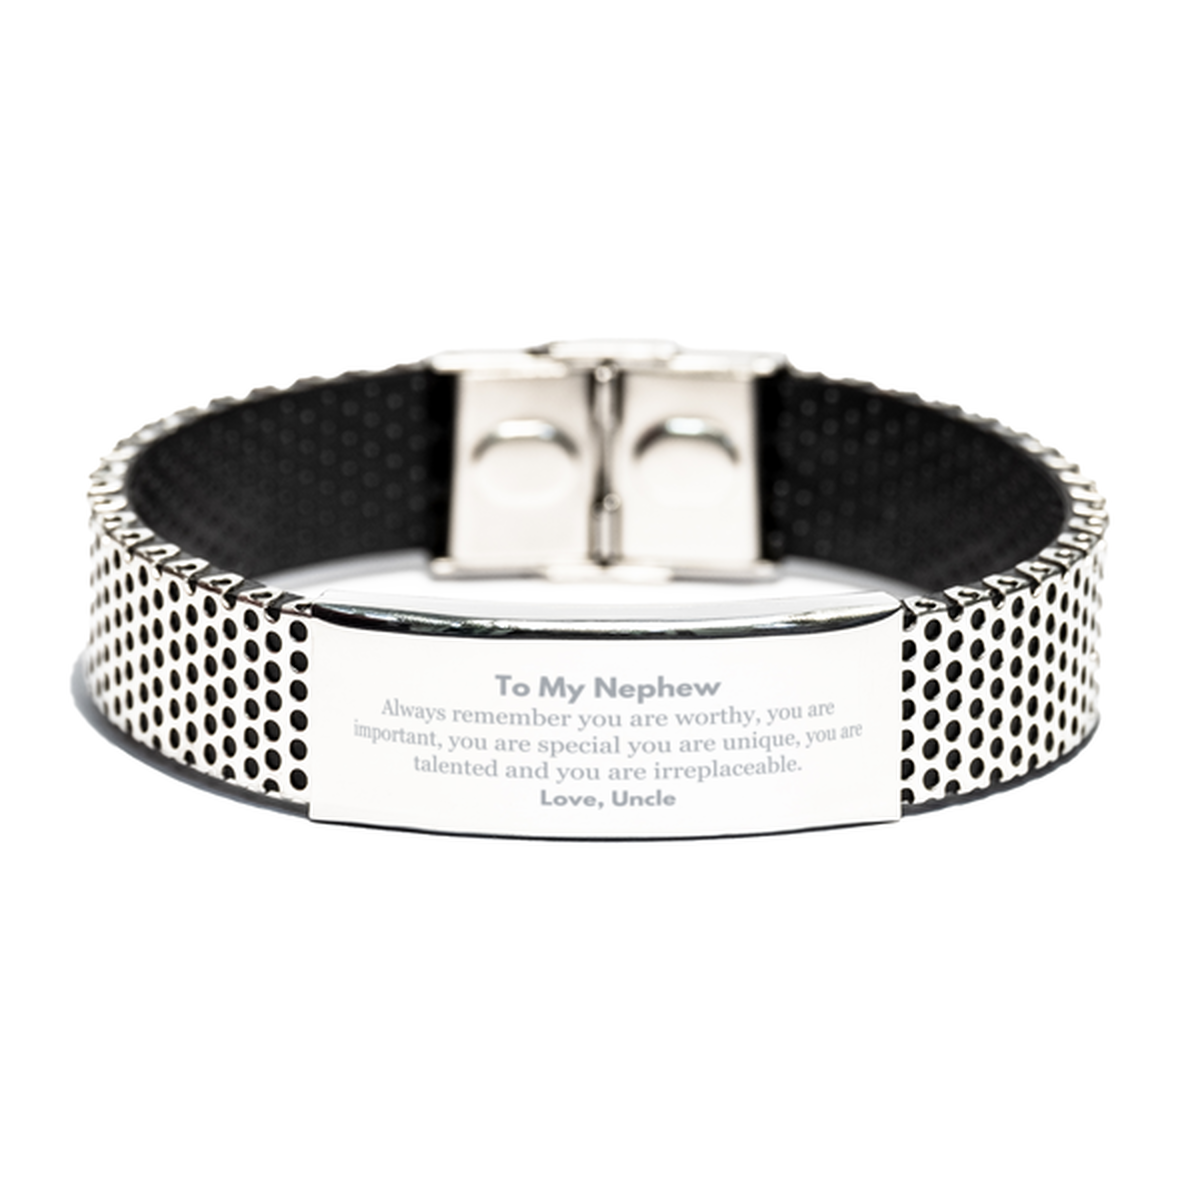 Nephew Birthday Gifts from Uncle, Inspirational Stainless Steel Bracelet for Nephew Christmas Graduation Gifts for Nephew Always remember you are worthy, you are important. Love, Uncle